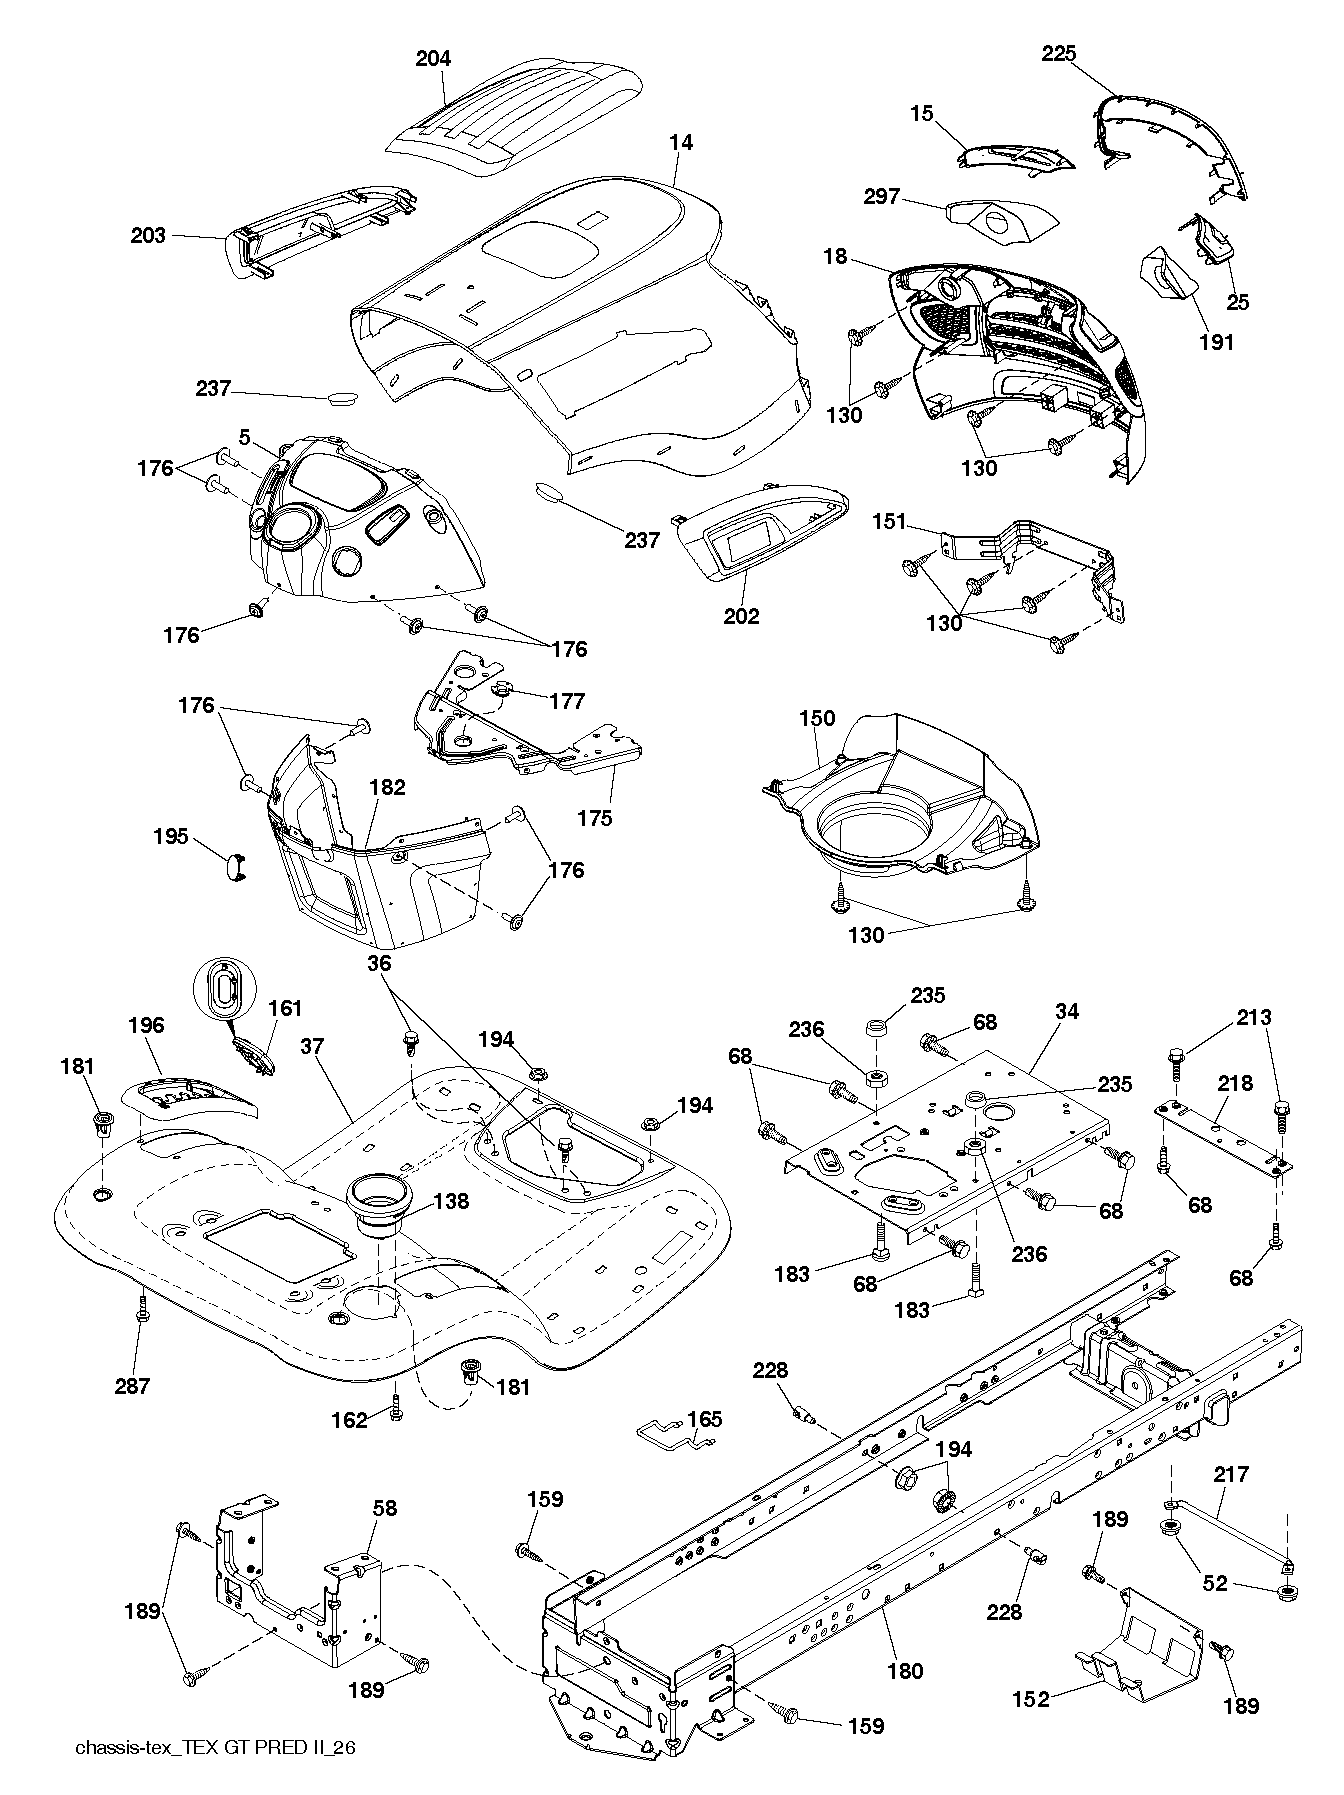 Chassis and appendix 532441882, 501128502, 581103101, 581102902, 581103001, 580910801, 596030701, 583939701, 596040501, 532412280, 539990858, 596321701, 532409730, 584862903, 532445494, 531169901, 817000612, 532412072, 532142432, 532196826, 590607702, 532400776, 532195228, 532415063, 532404796, 586738602, 874520520, 532428867, 581223501, 873900500, 532404137, 532414581, 501510101, 501510102, 587963201, 596030501, 532409167, 532196395, 581103201, 593824001, 532406129, 873930500, 532403704, 817600406, 581223601, 532441126